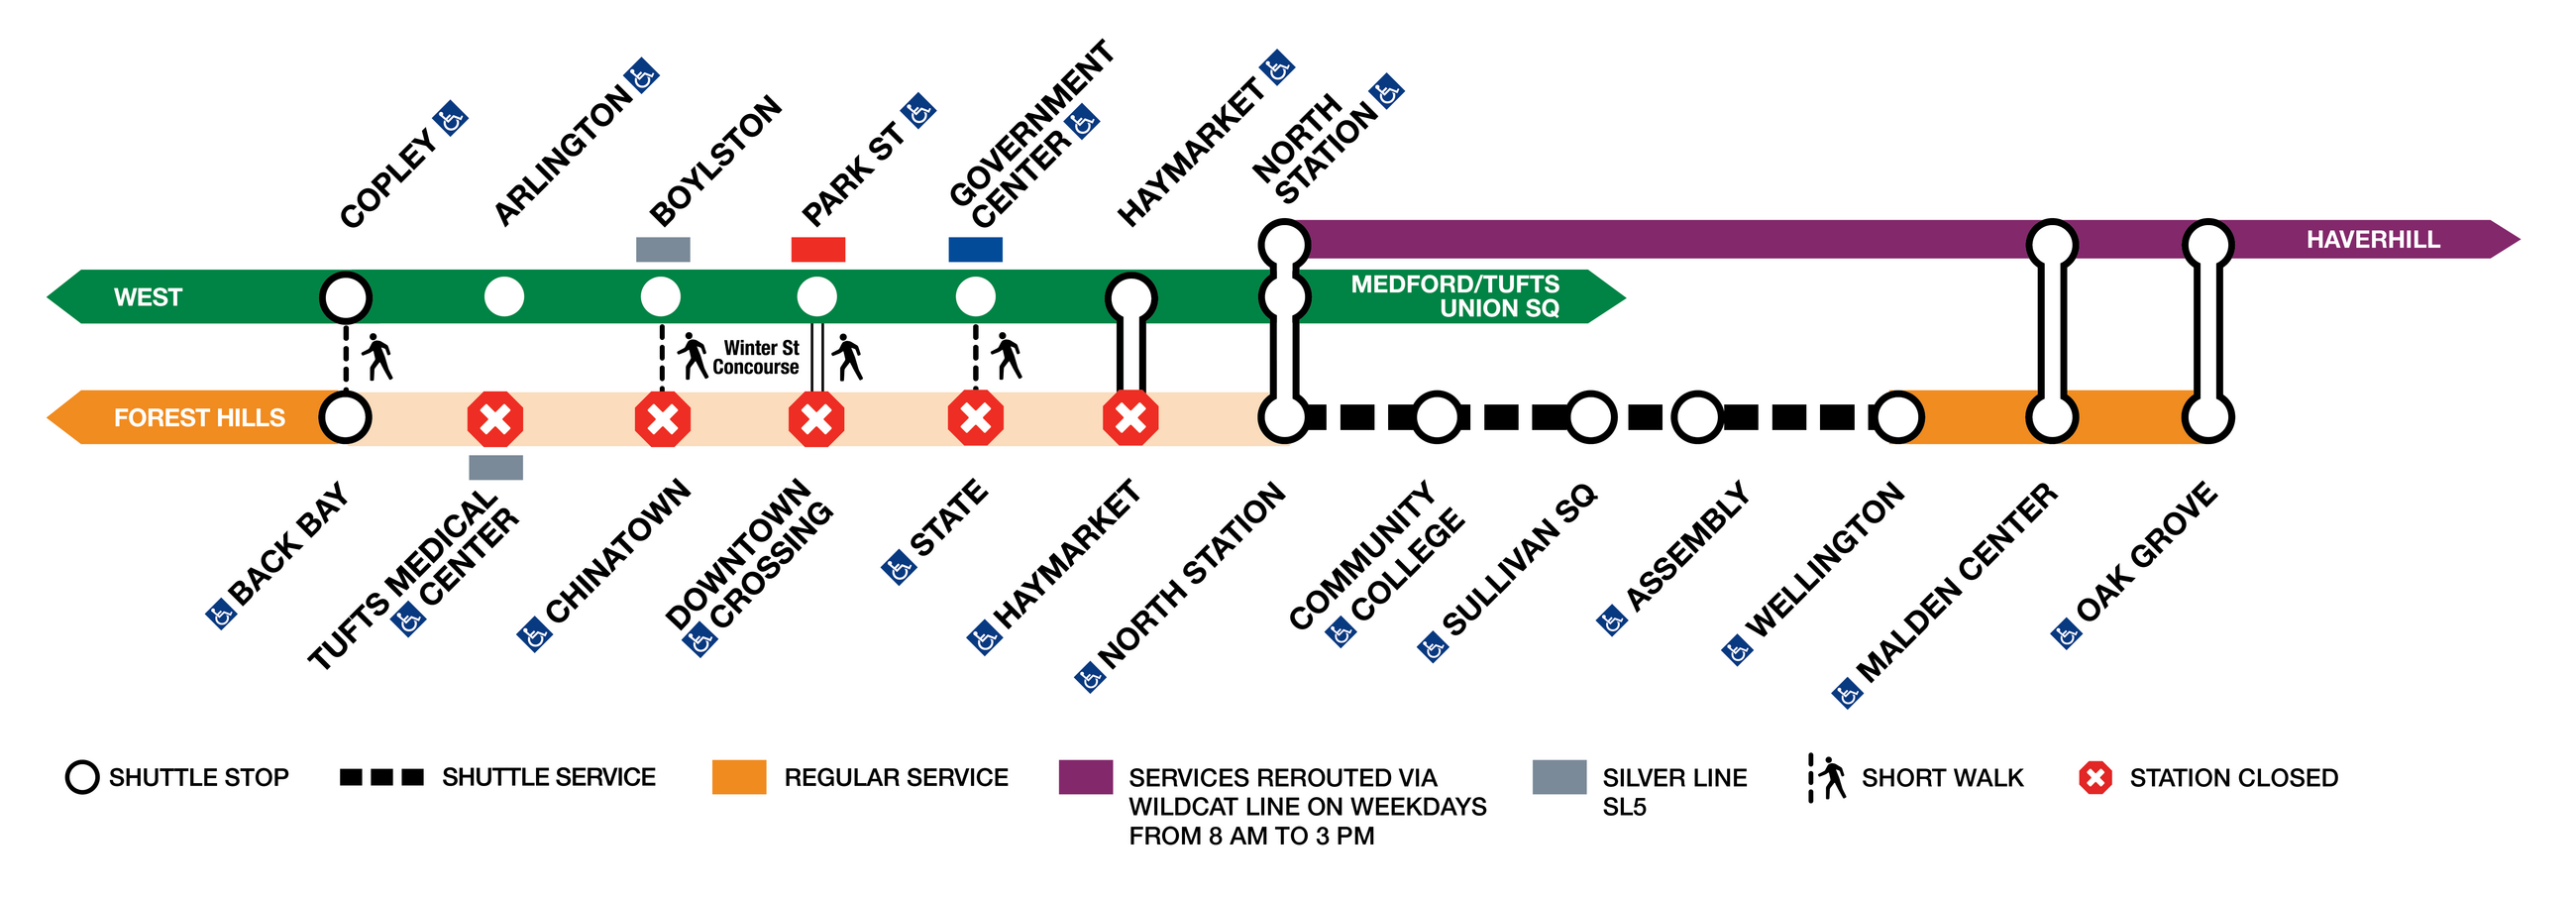 Orange Line diversion diagram with shuttle and Green Line diversions